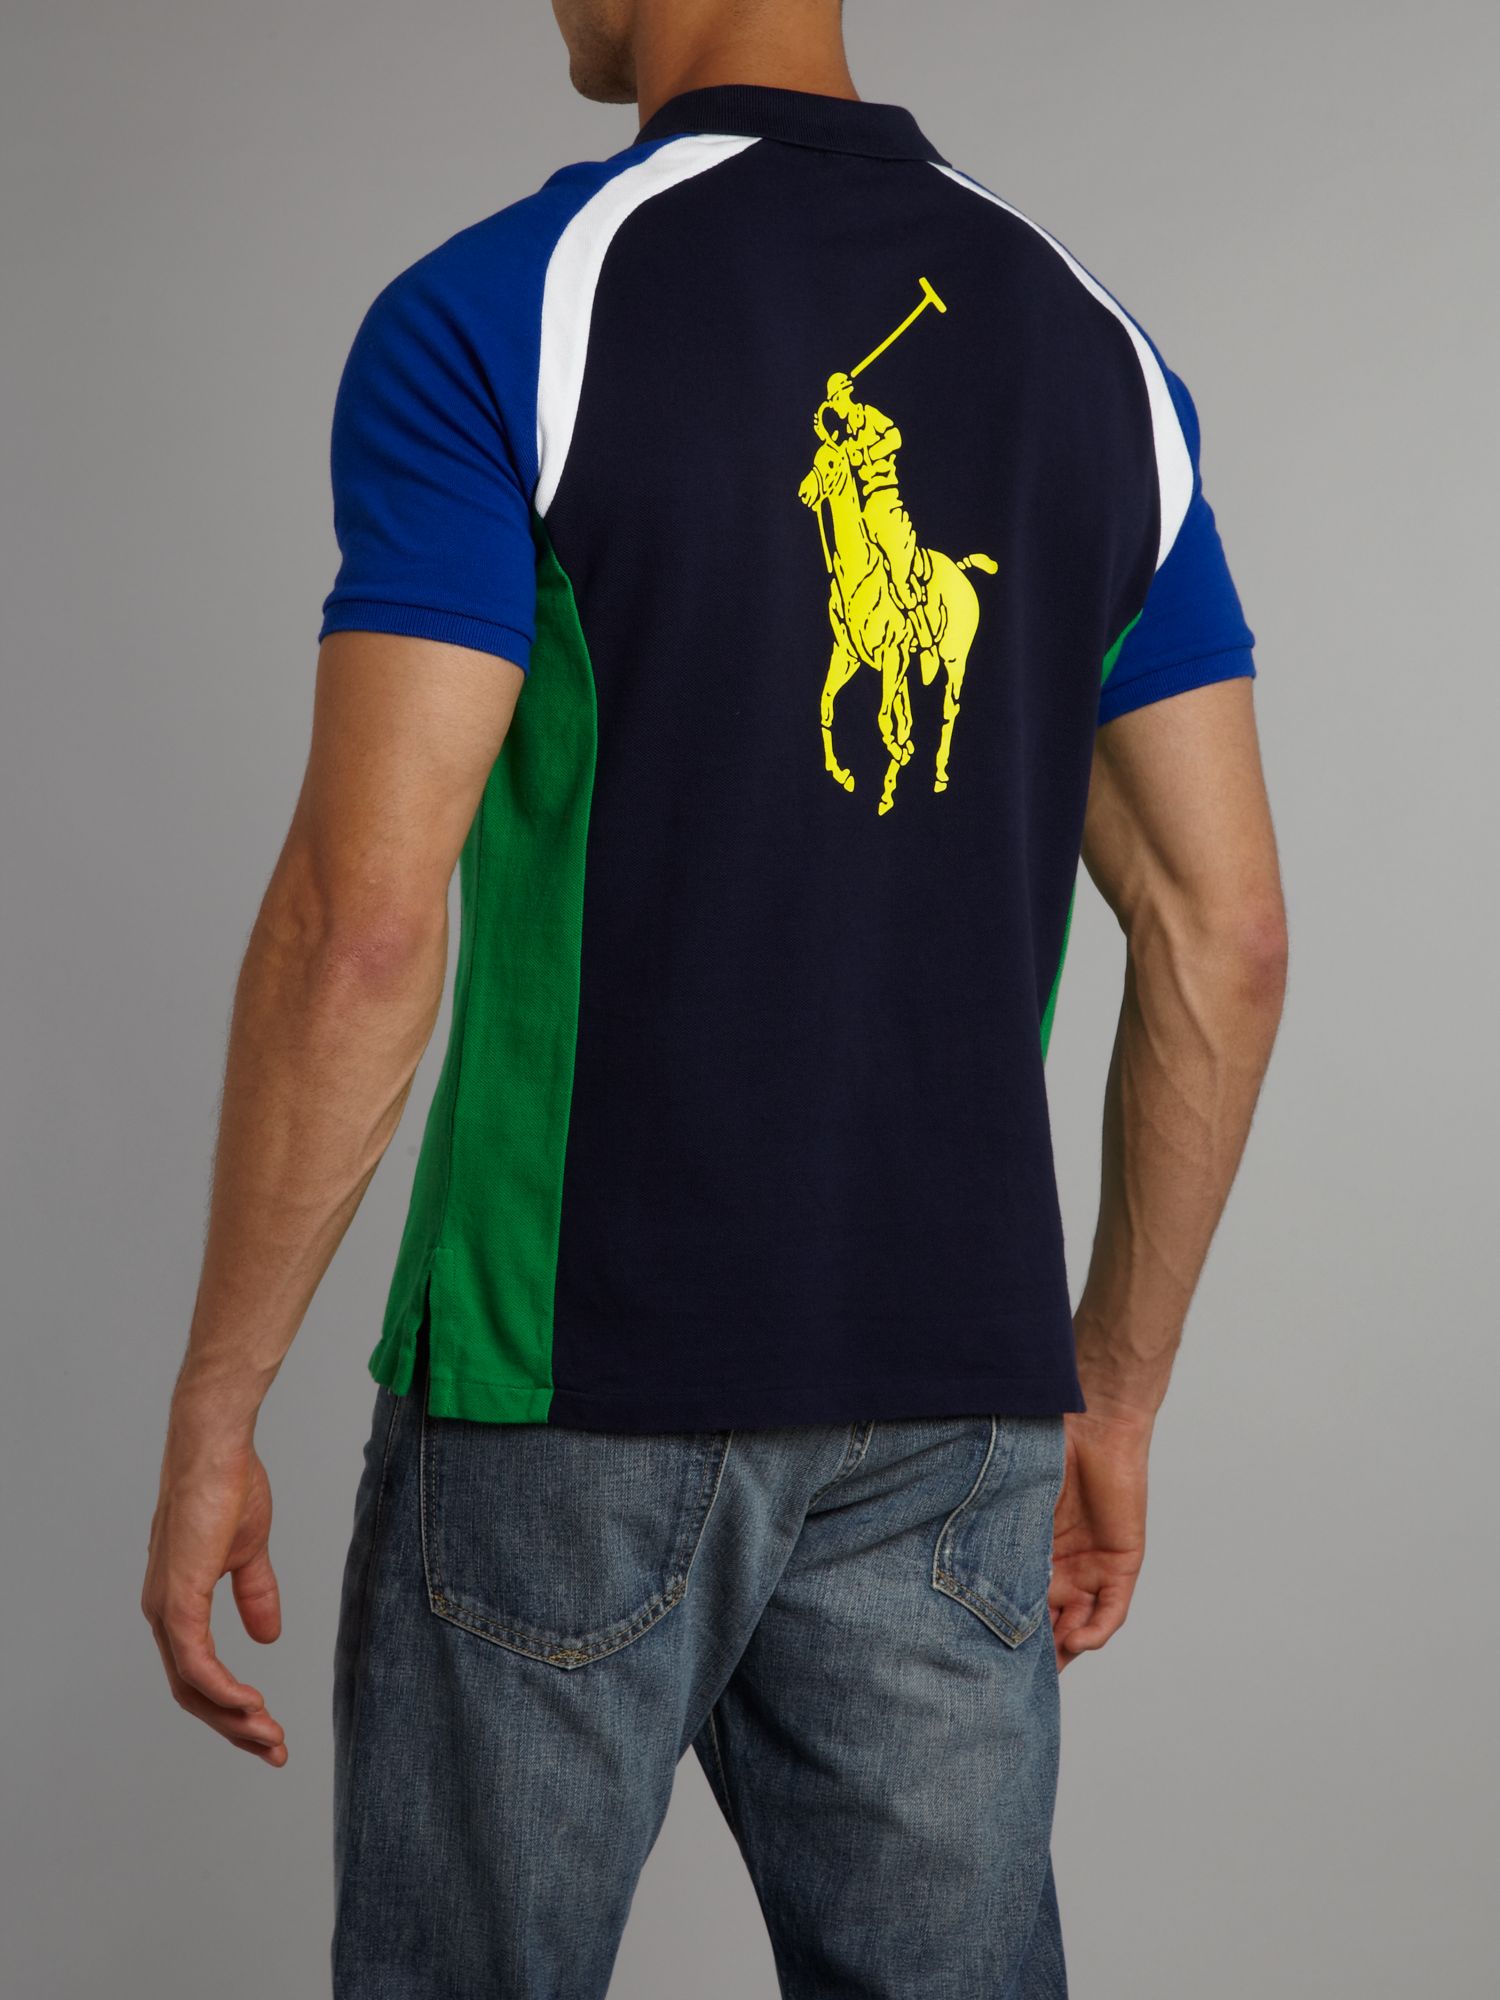 Polo ralph lauren Us Open Big Pony Back Printed Polo Shirt in Blue for